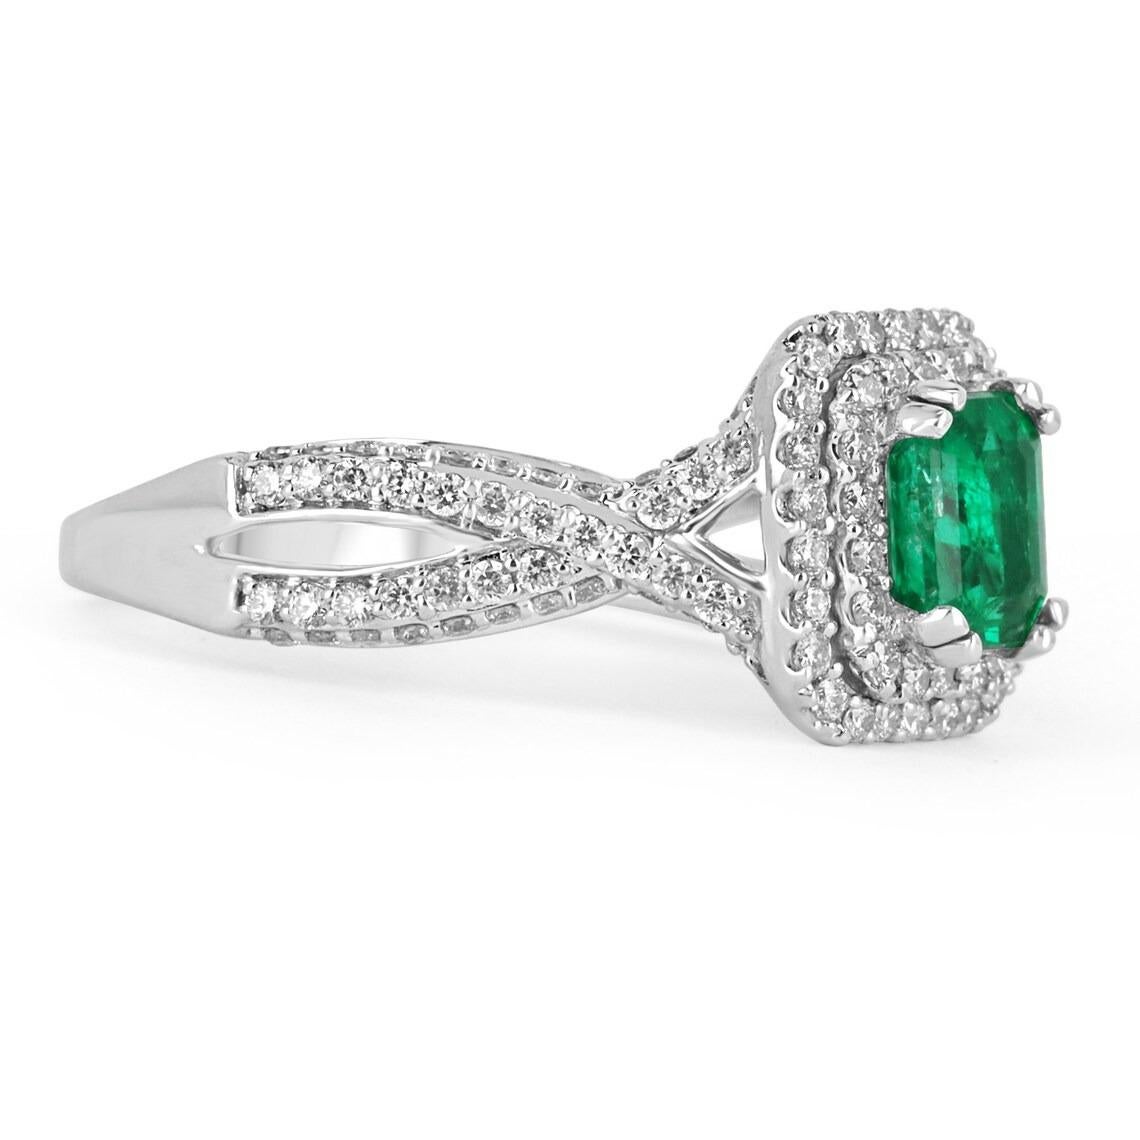 An exquisite emerald and diamond engagement/right-hand ring. The gorgeous setting lets sit a fine quality, earth-mined, natural emerald with beautiful vivid Muzo green color and excellent eye clarity. The color and clarity combination is so rare and